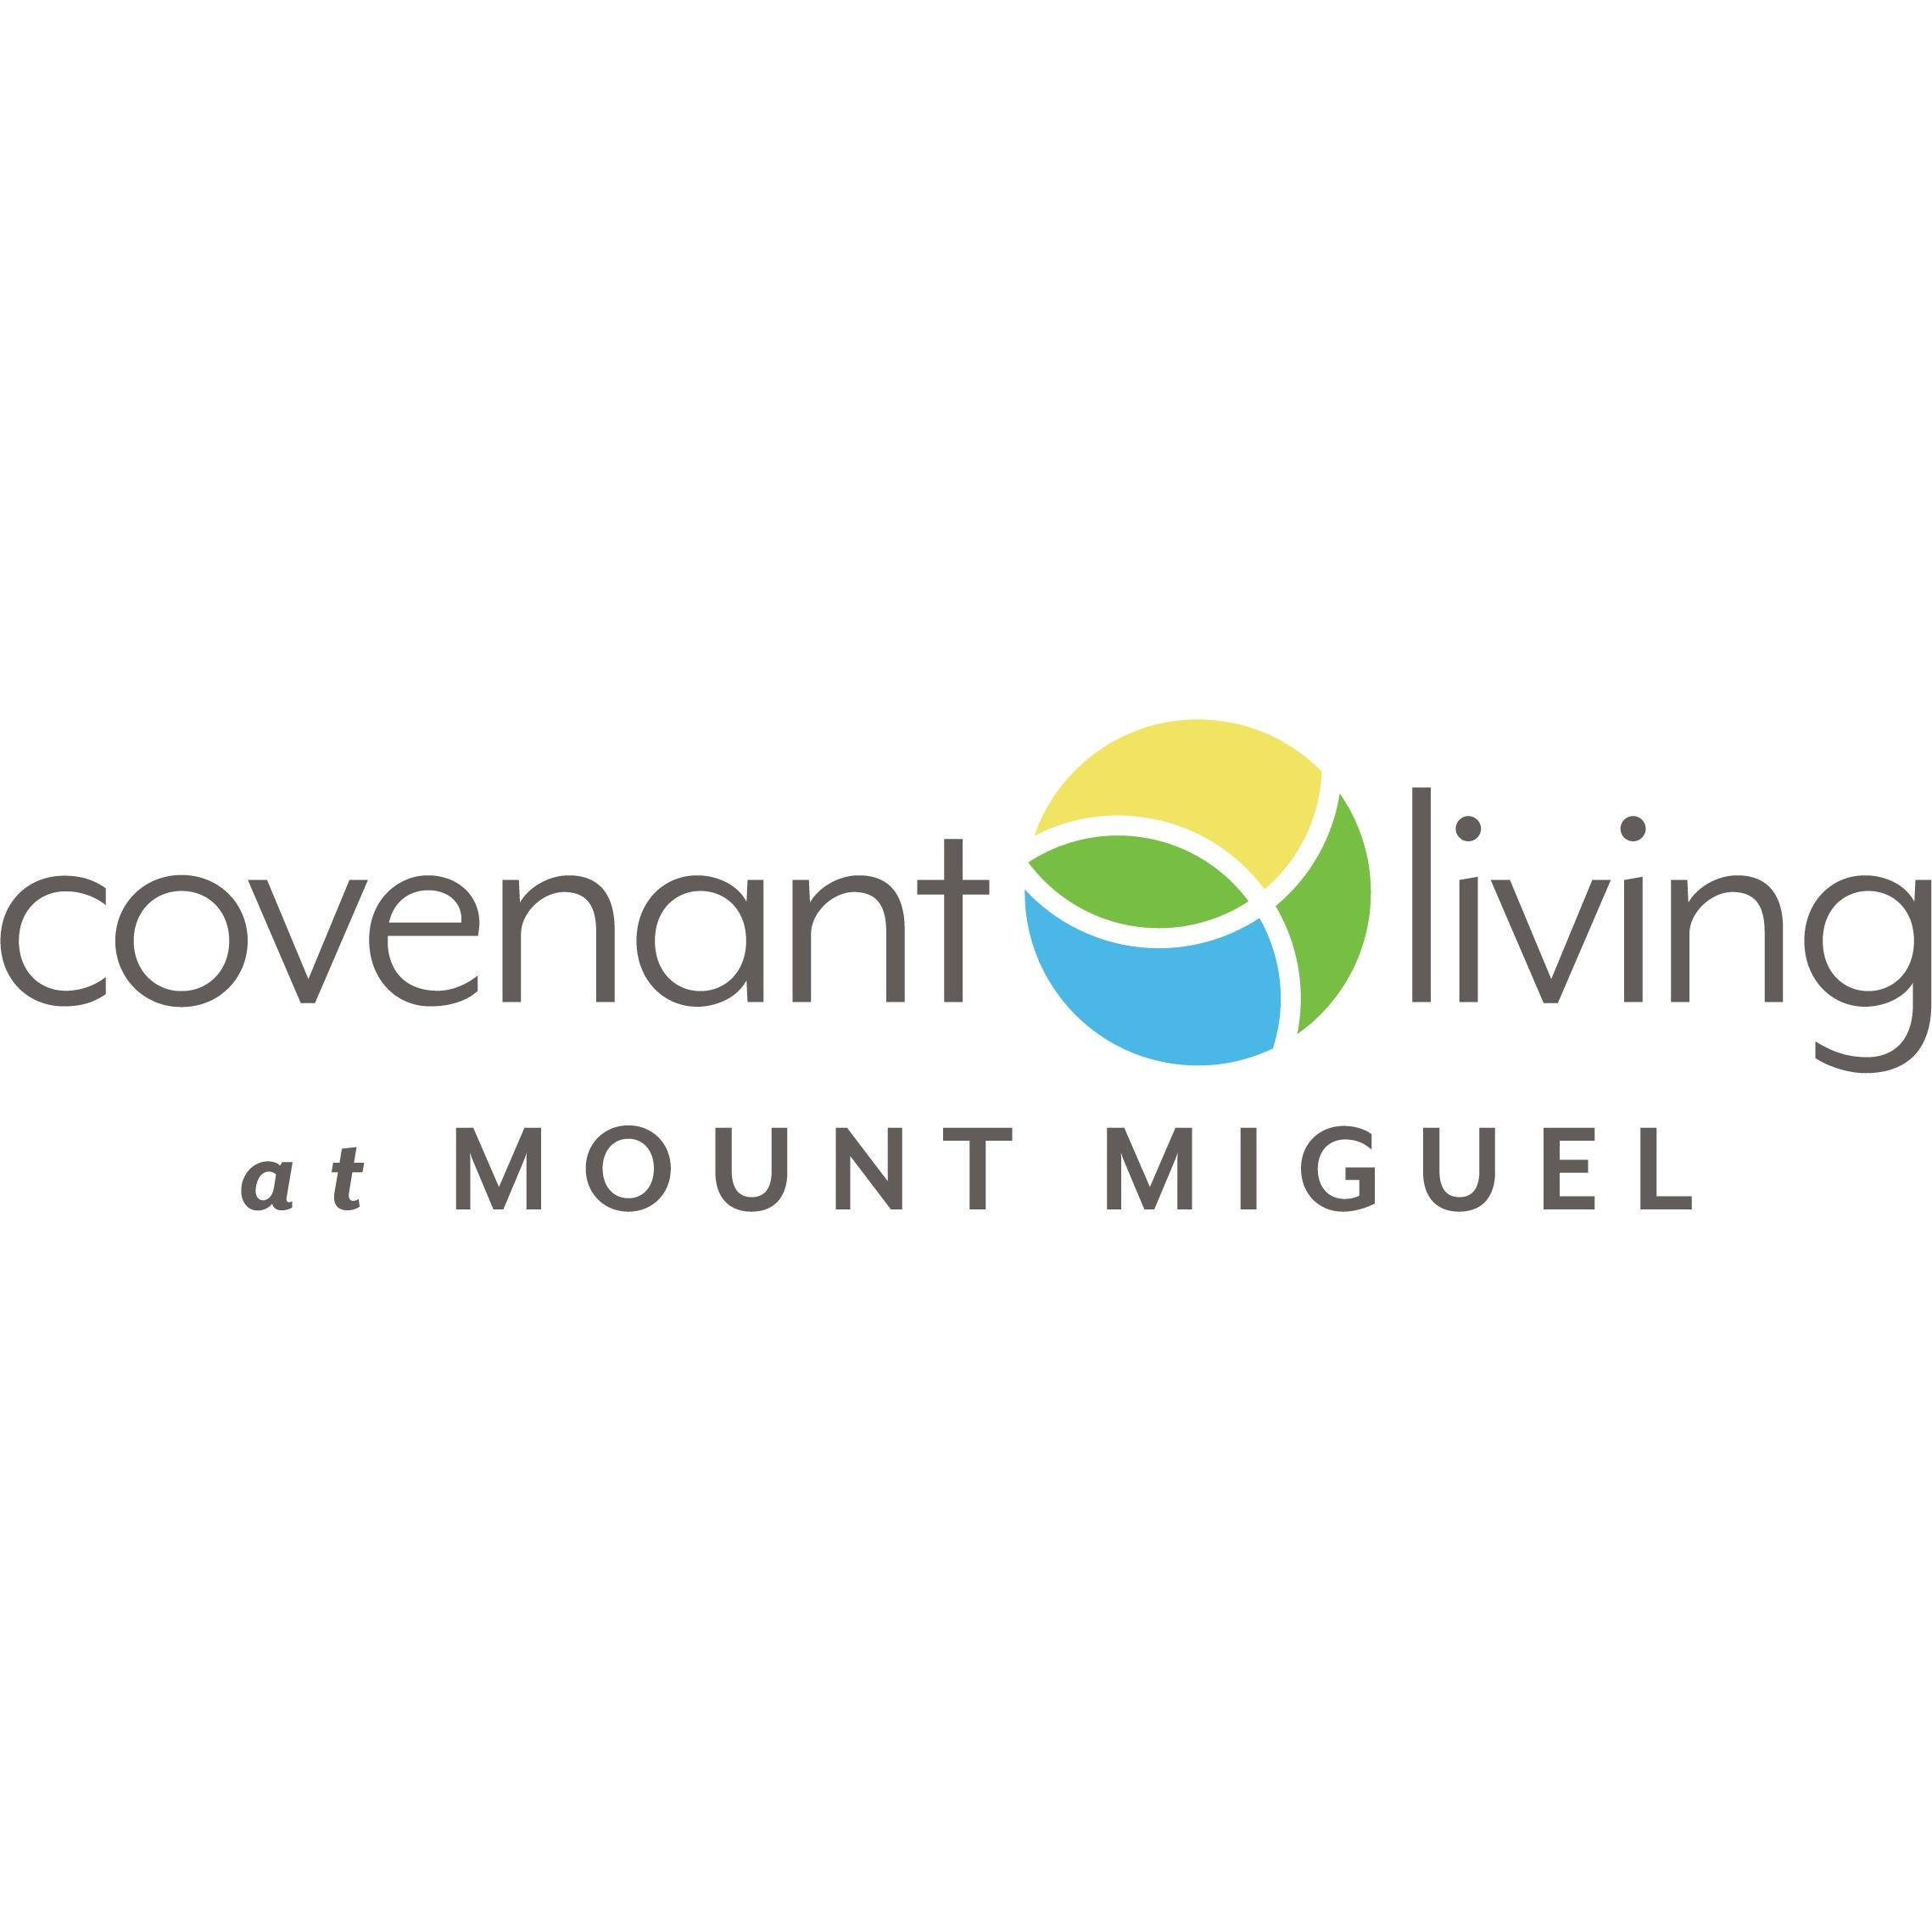 Covenant Living at Mount Miguel